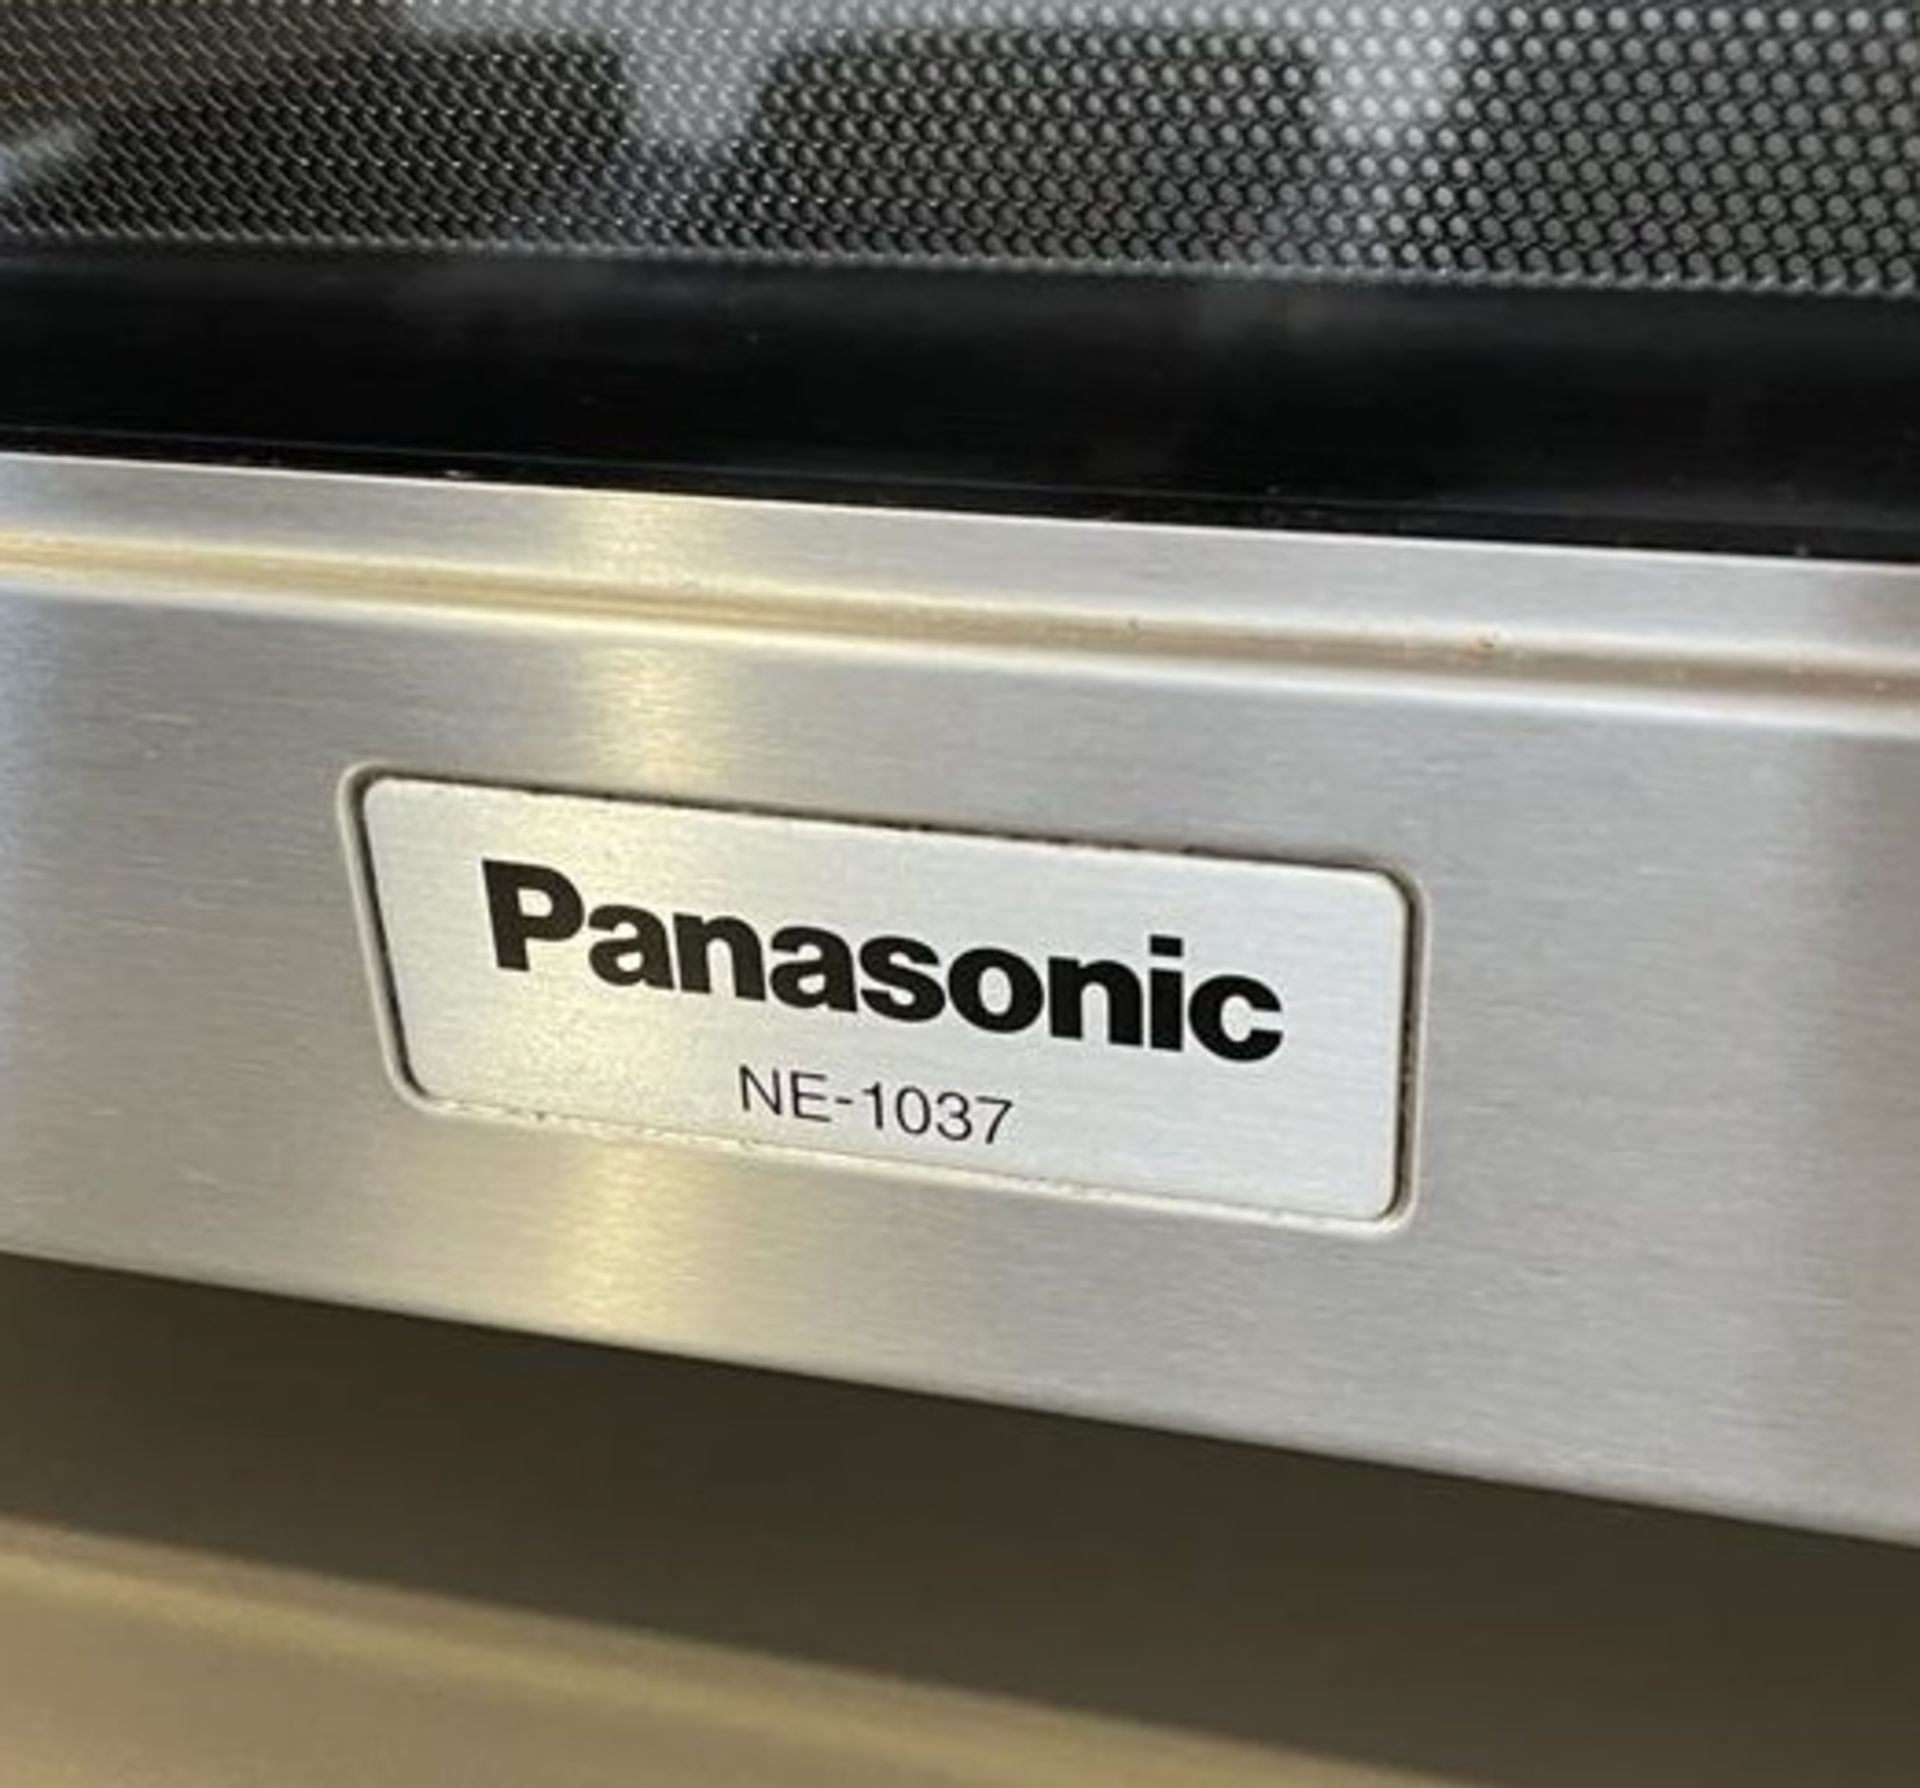 1 x Panasonic NE-1037 Commercial Microwave Oven With Stainless Steel Finish - CL670 - Ref: - Image 4 of 5